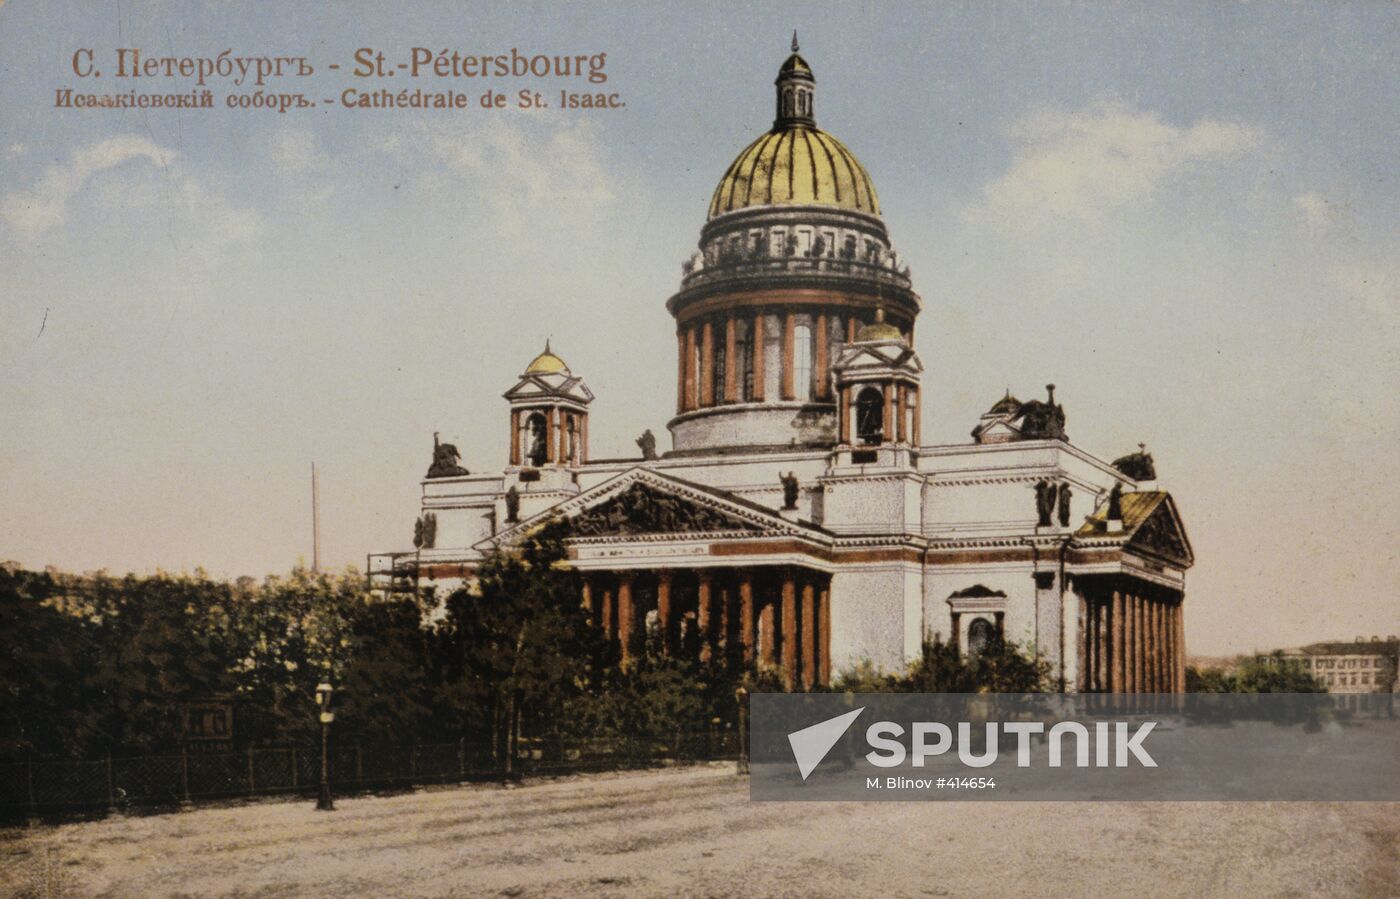 Postcard depicting St. Isaac's Cathedral in St. Petersburg